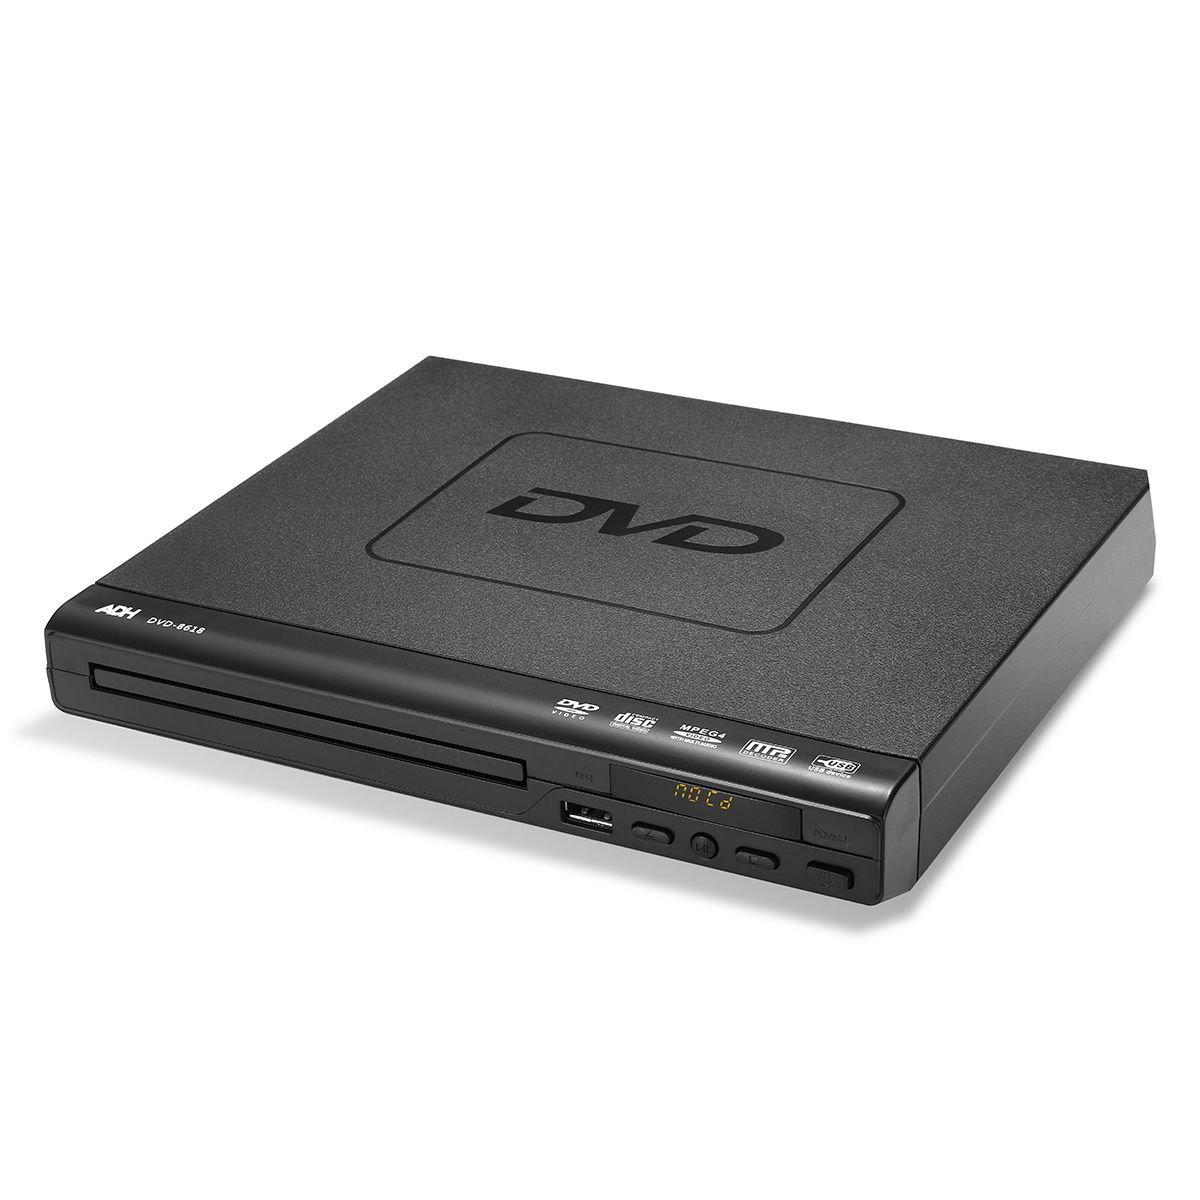 1080P-DVD-Player-Remote-Controller-Multi-angle-Viewing-USB-SD-Card-Reader-CD-DVD-RW-1347690